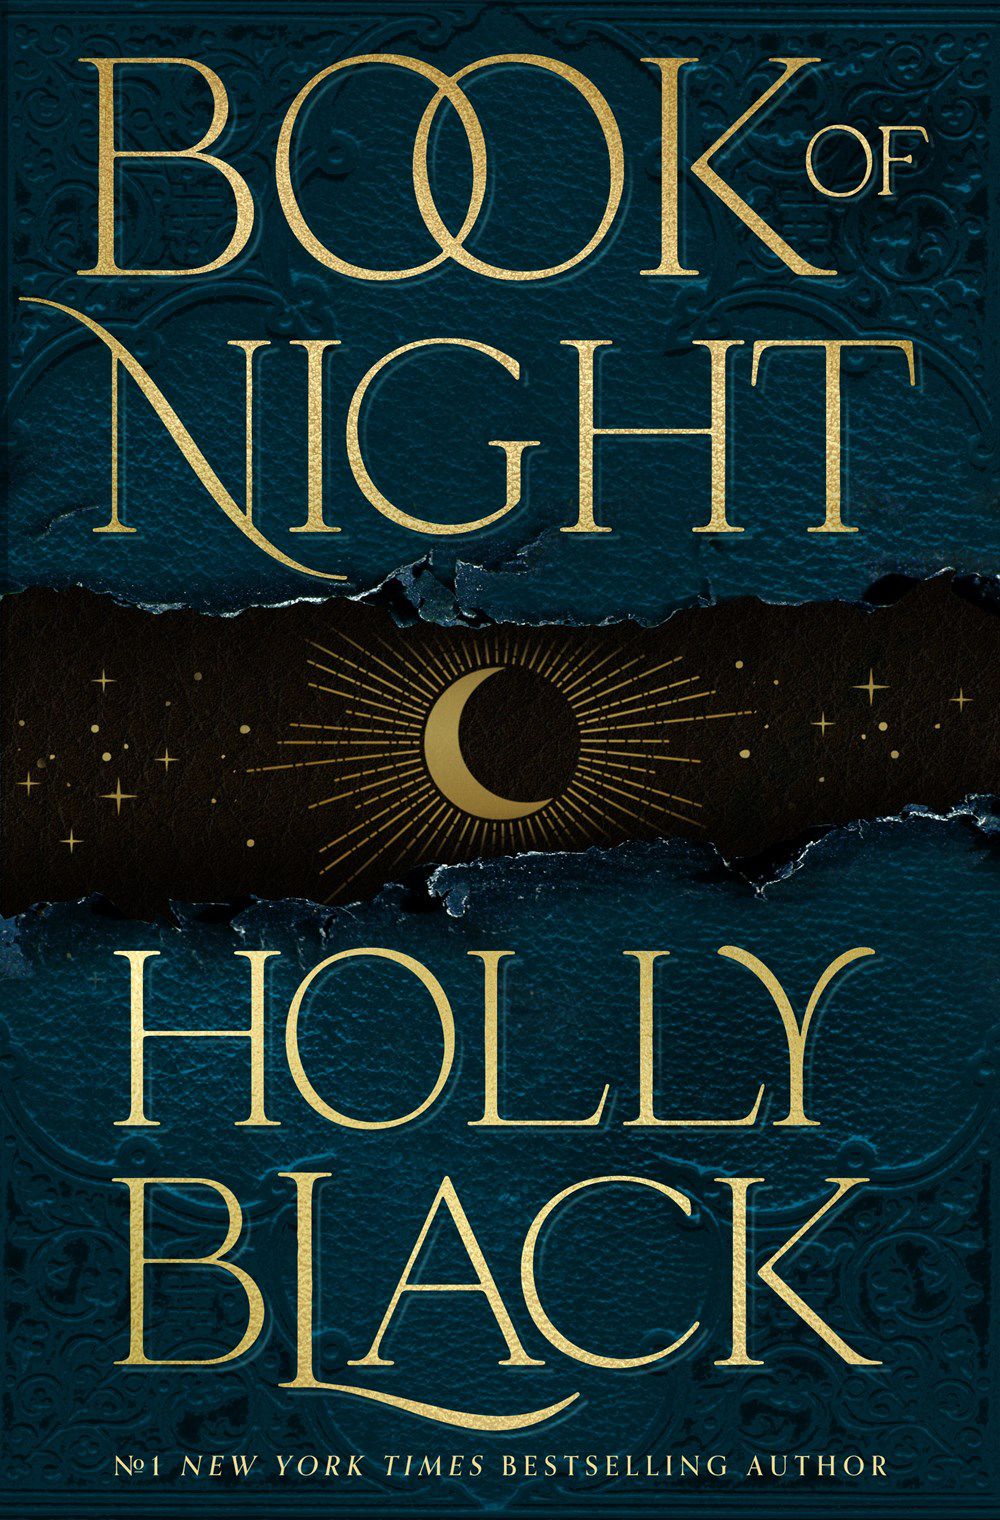 Night book cover by Holly Black, with a half moon on a black and blue background.